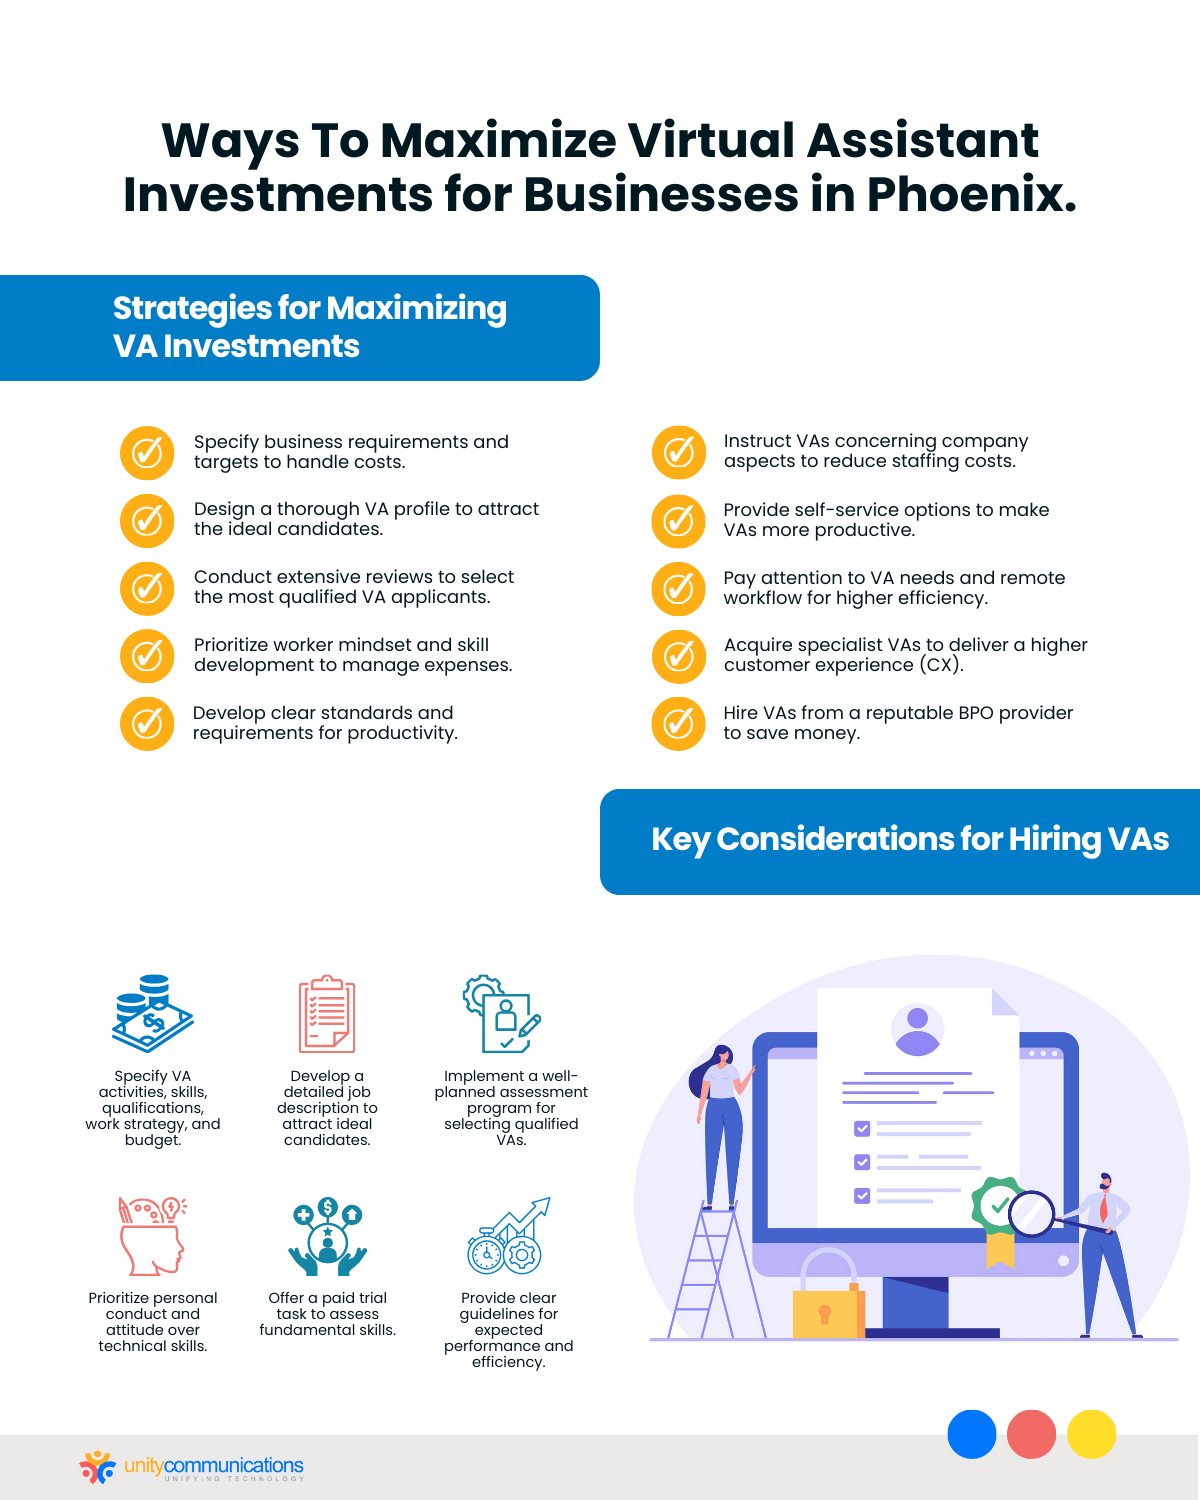 Ways To Maximize Virtual Assistant Investments for Businesses in Phoenix